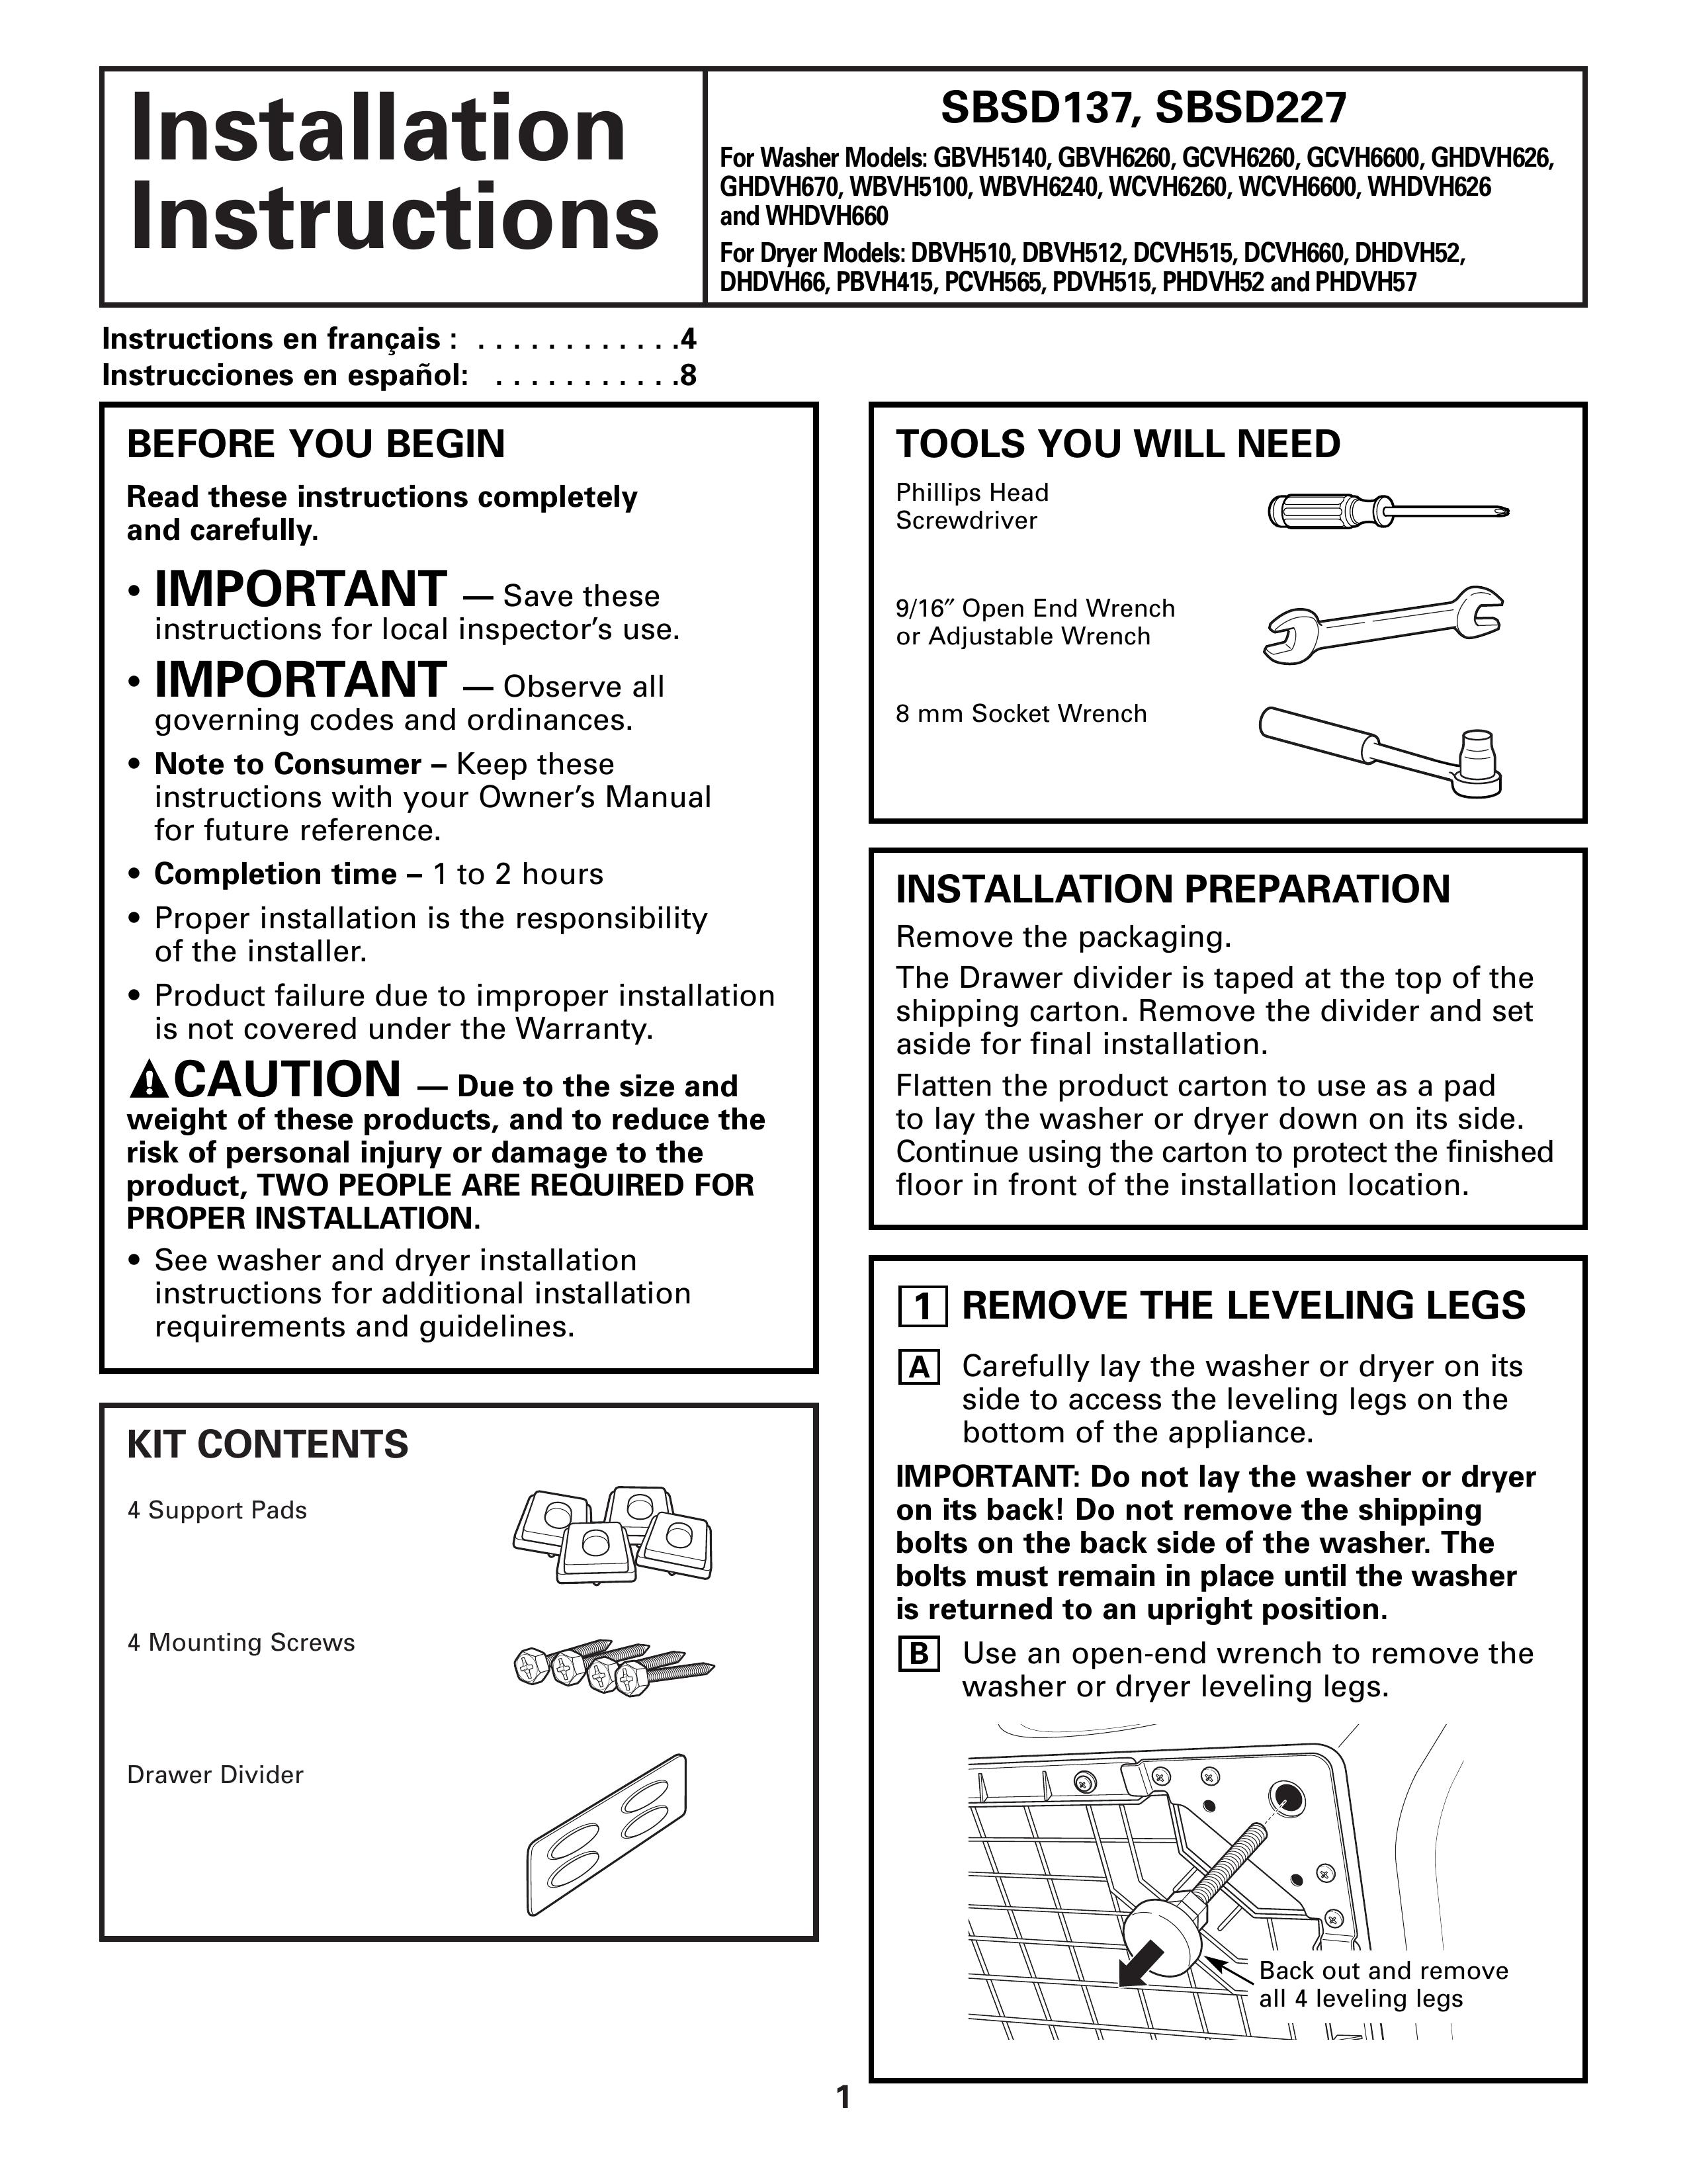 GE SBSD227 Washer Accessories User Manual